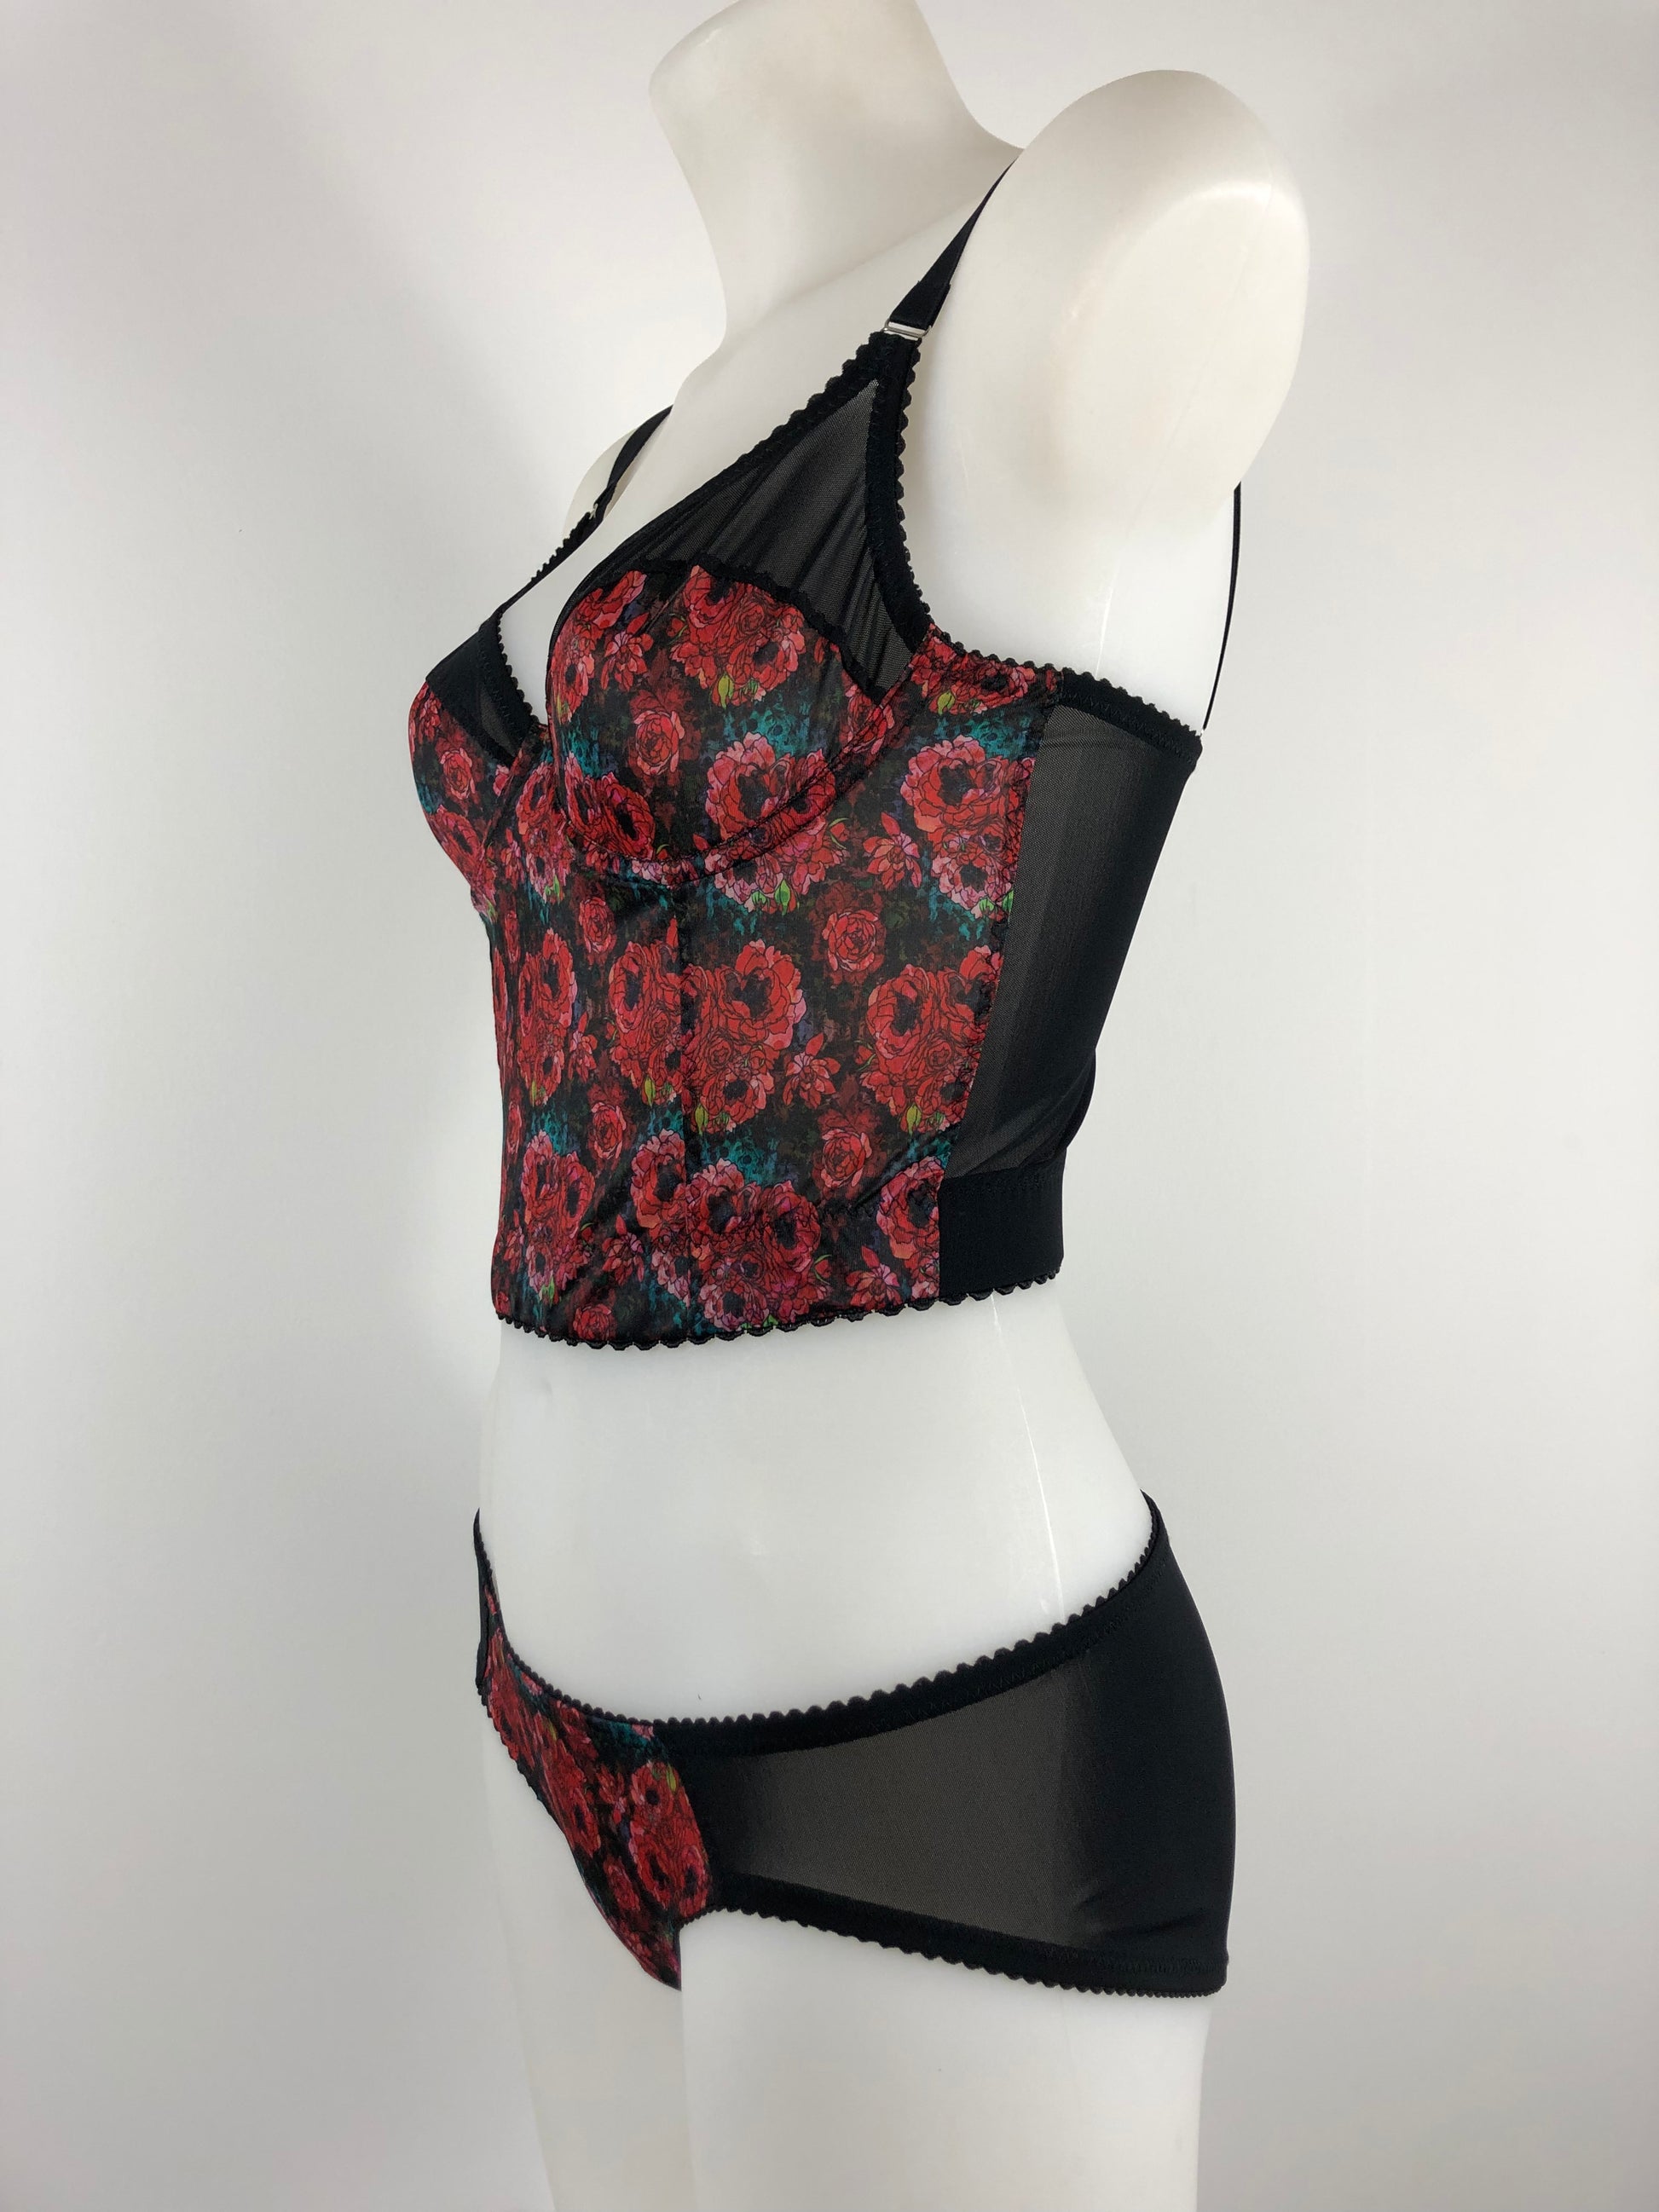 love witch inspired lingerie set. extra longline underwired bra inspired by the anna biller film. Used a rich red floral brocade style pattern with black mesh and trims. Ideal gothic, spiritual, witchy underwear